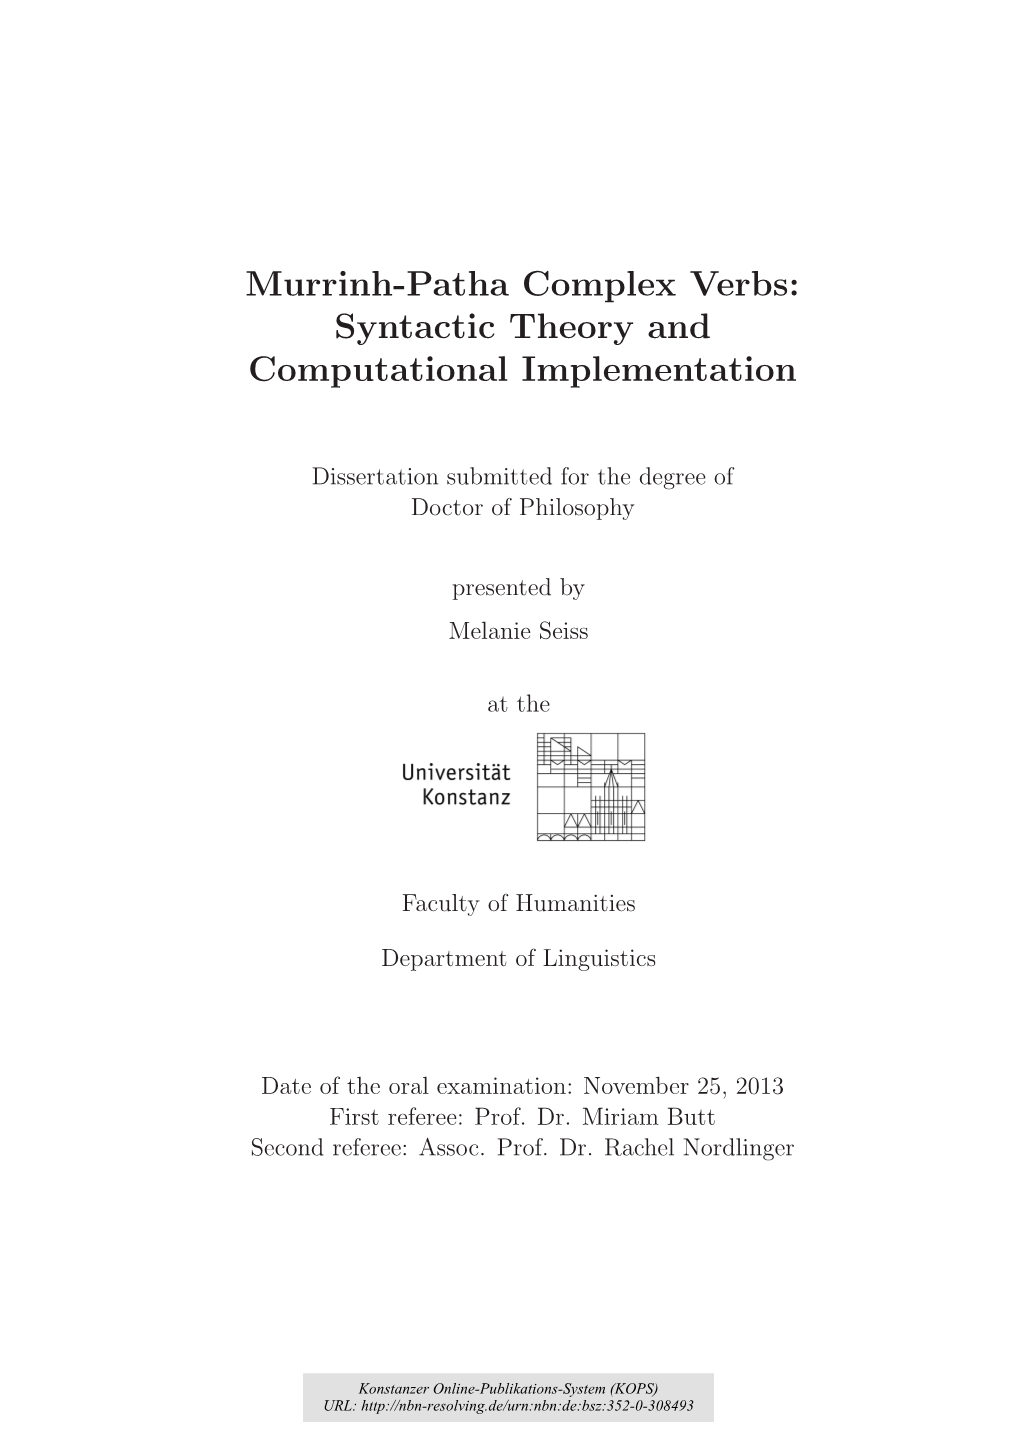 Murrinh-Patha Complex Verbs : Syntactic Theory and Computational